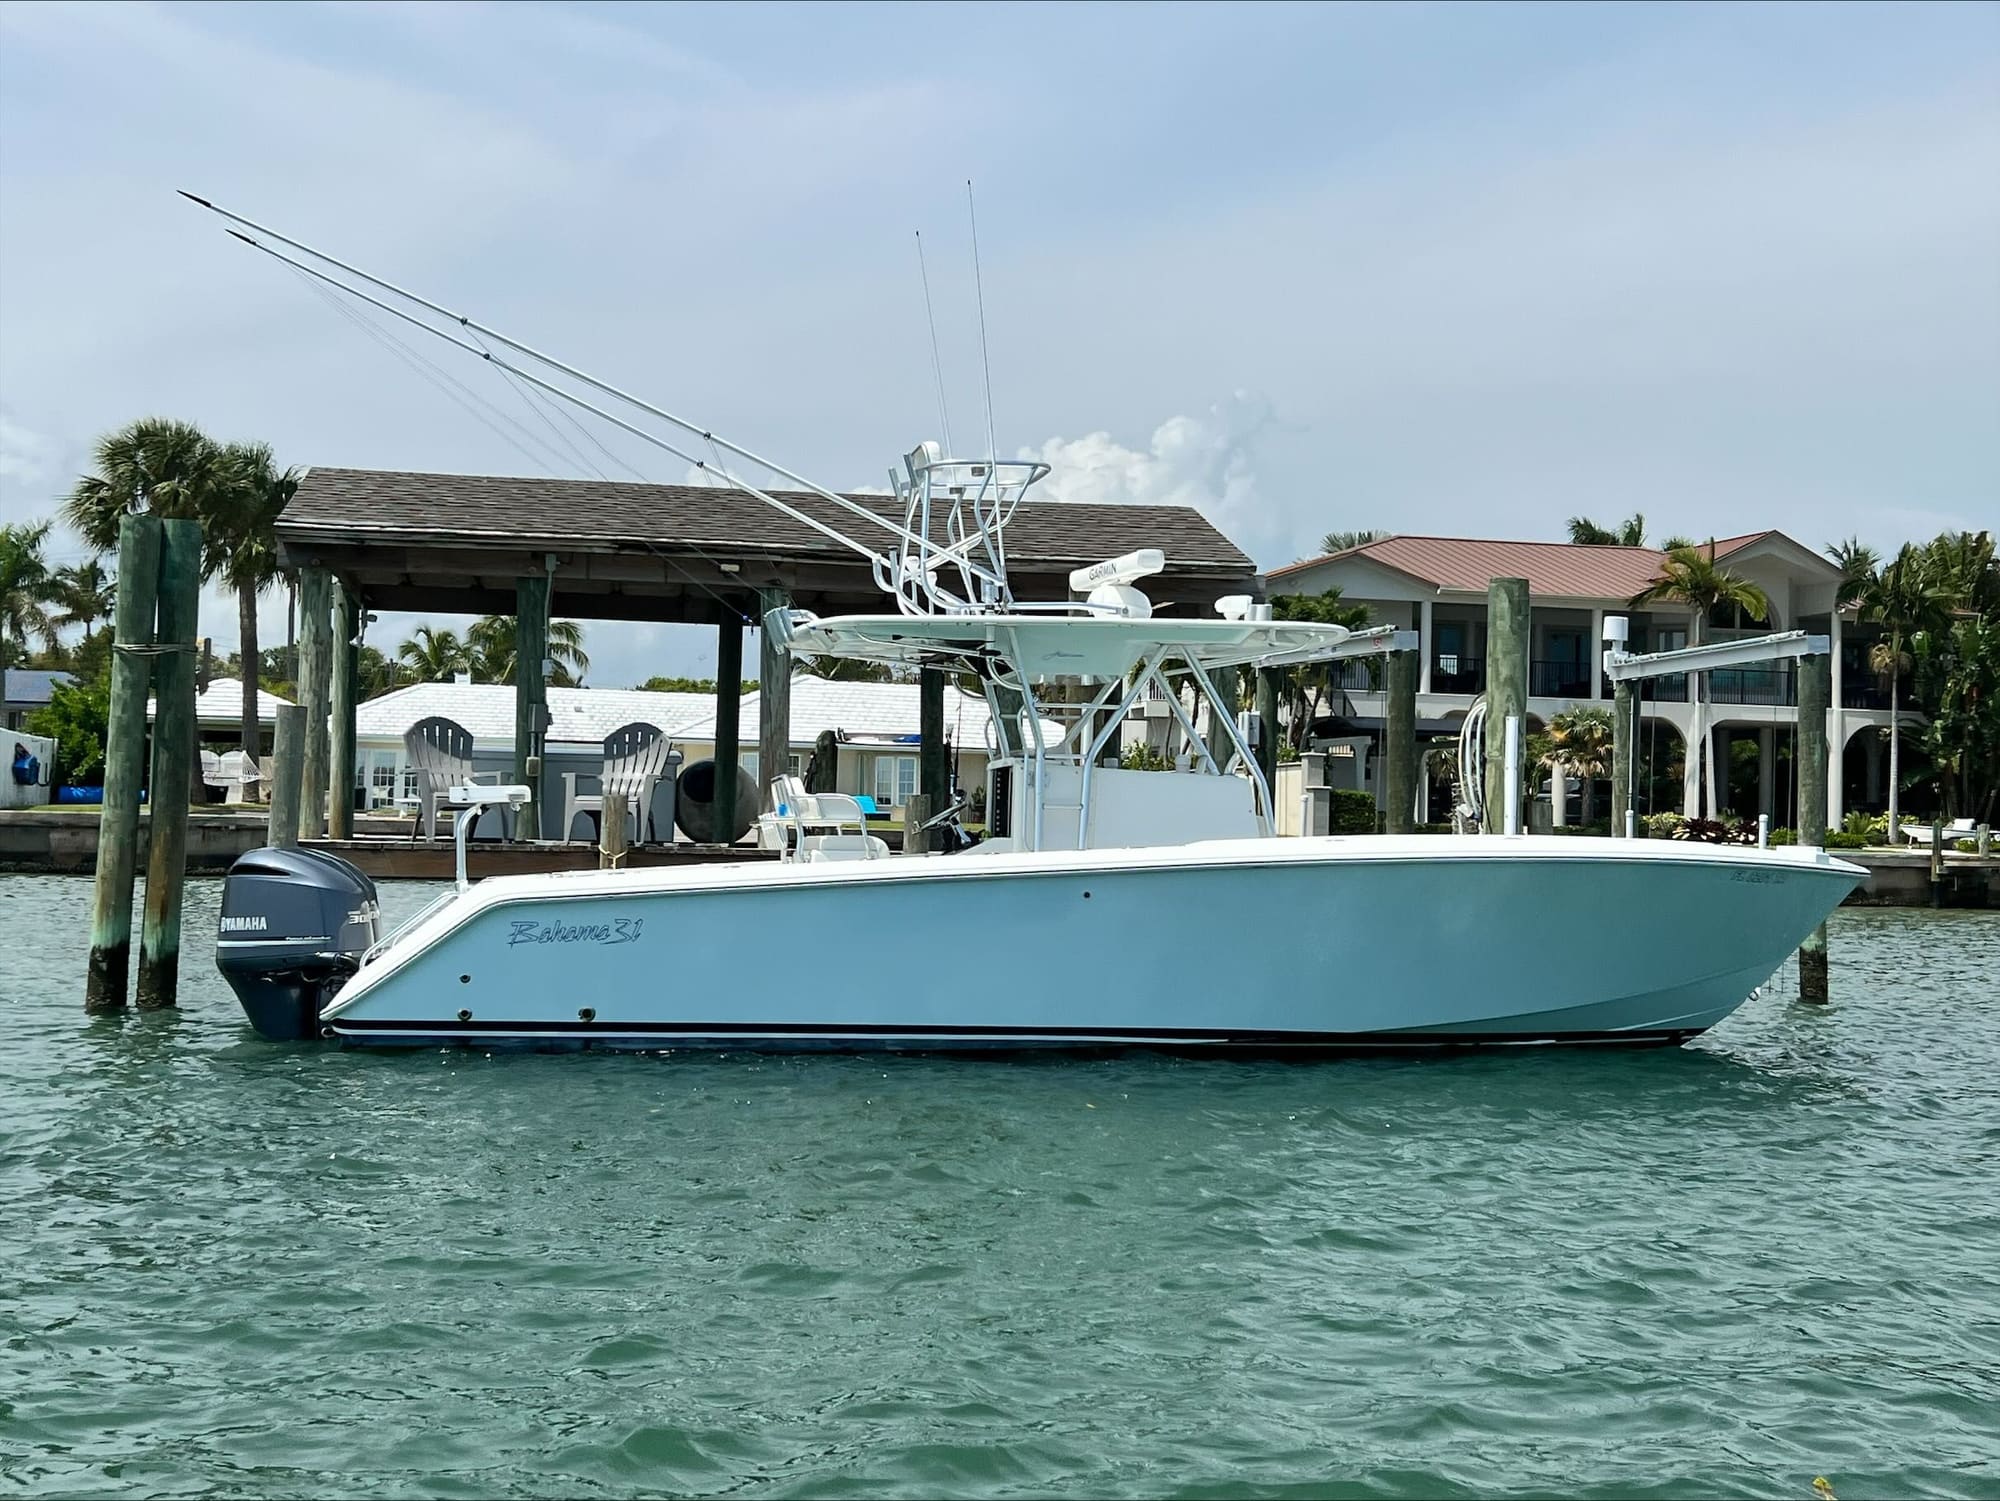 2007 Bahama Boatworks 31' CC w/many recent updates - The Hull Truth -  Boating and Fishing Forum